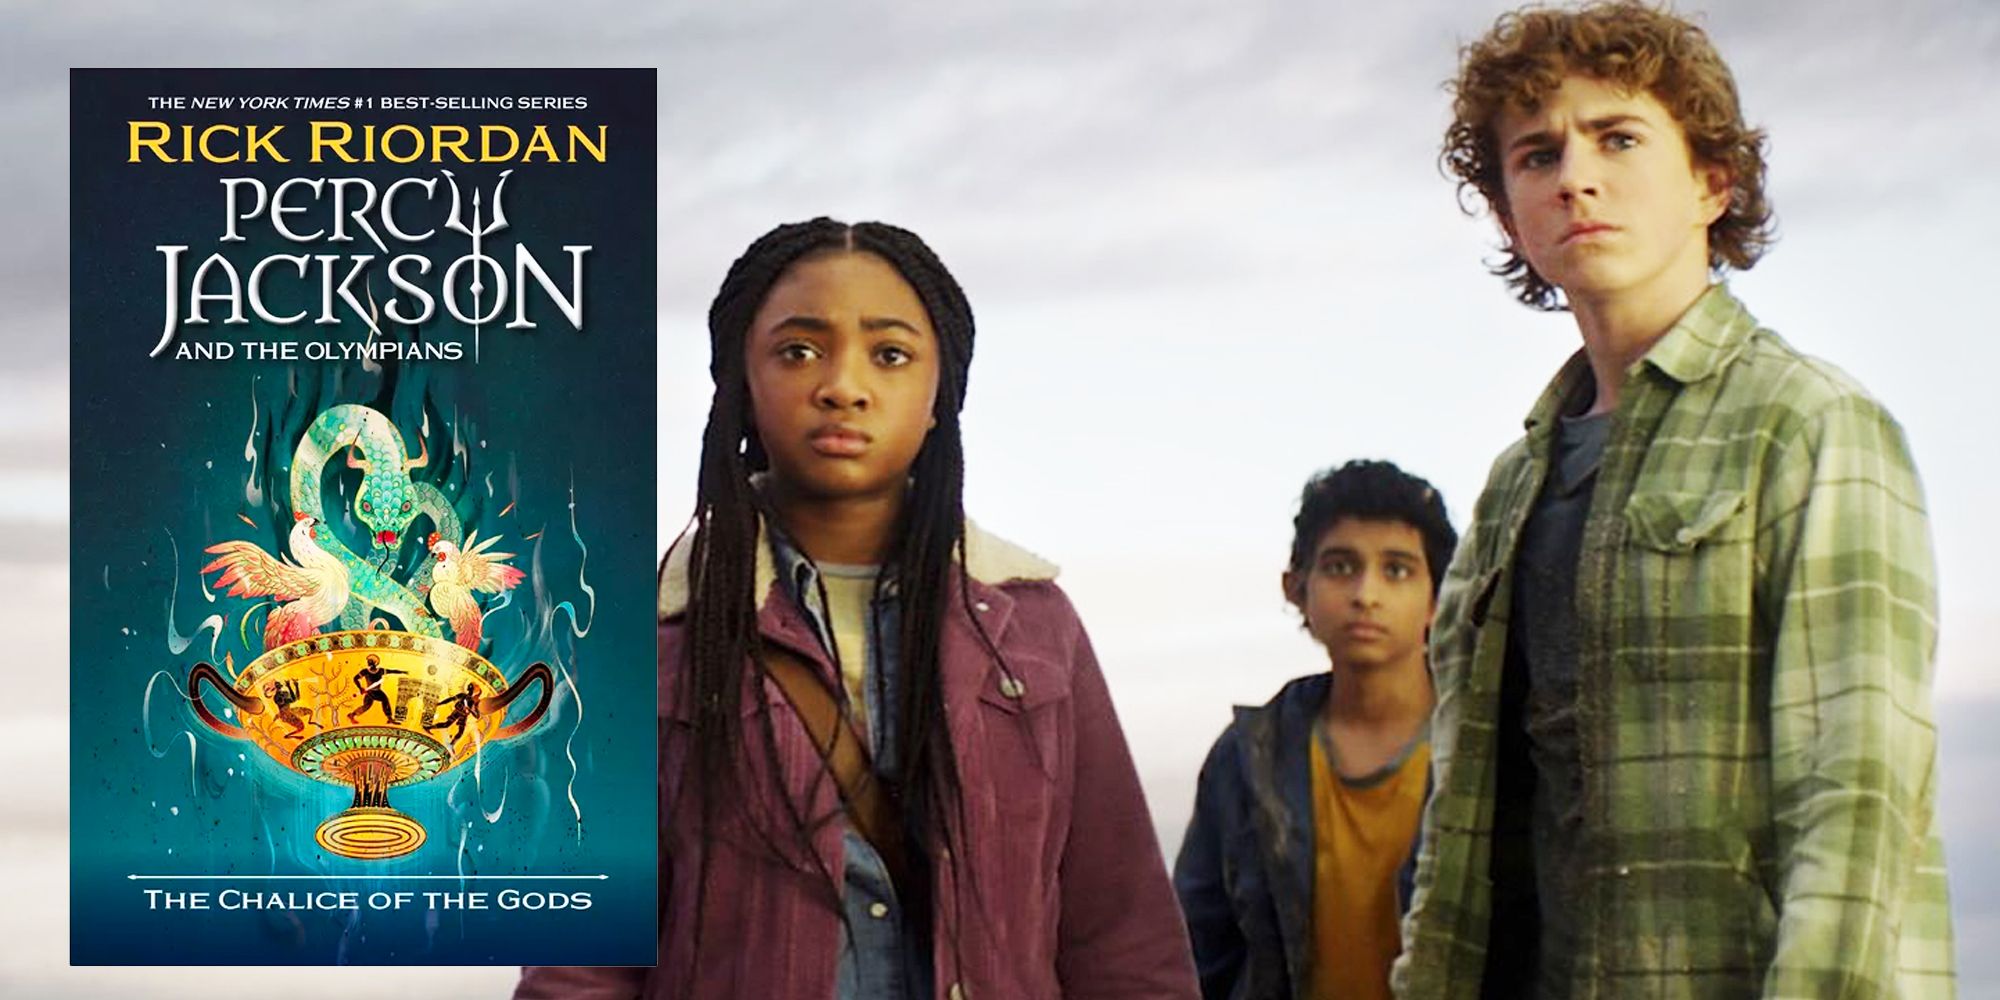 5 Things We Learned In Conversation With Percy Jackson Creator Rick Riordan